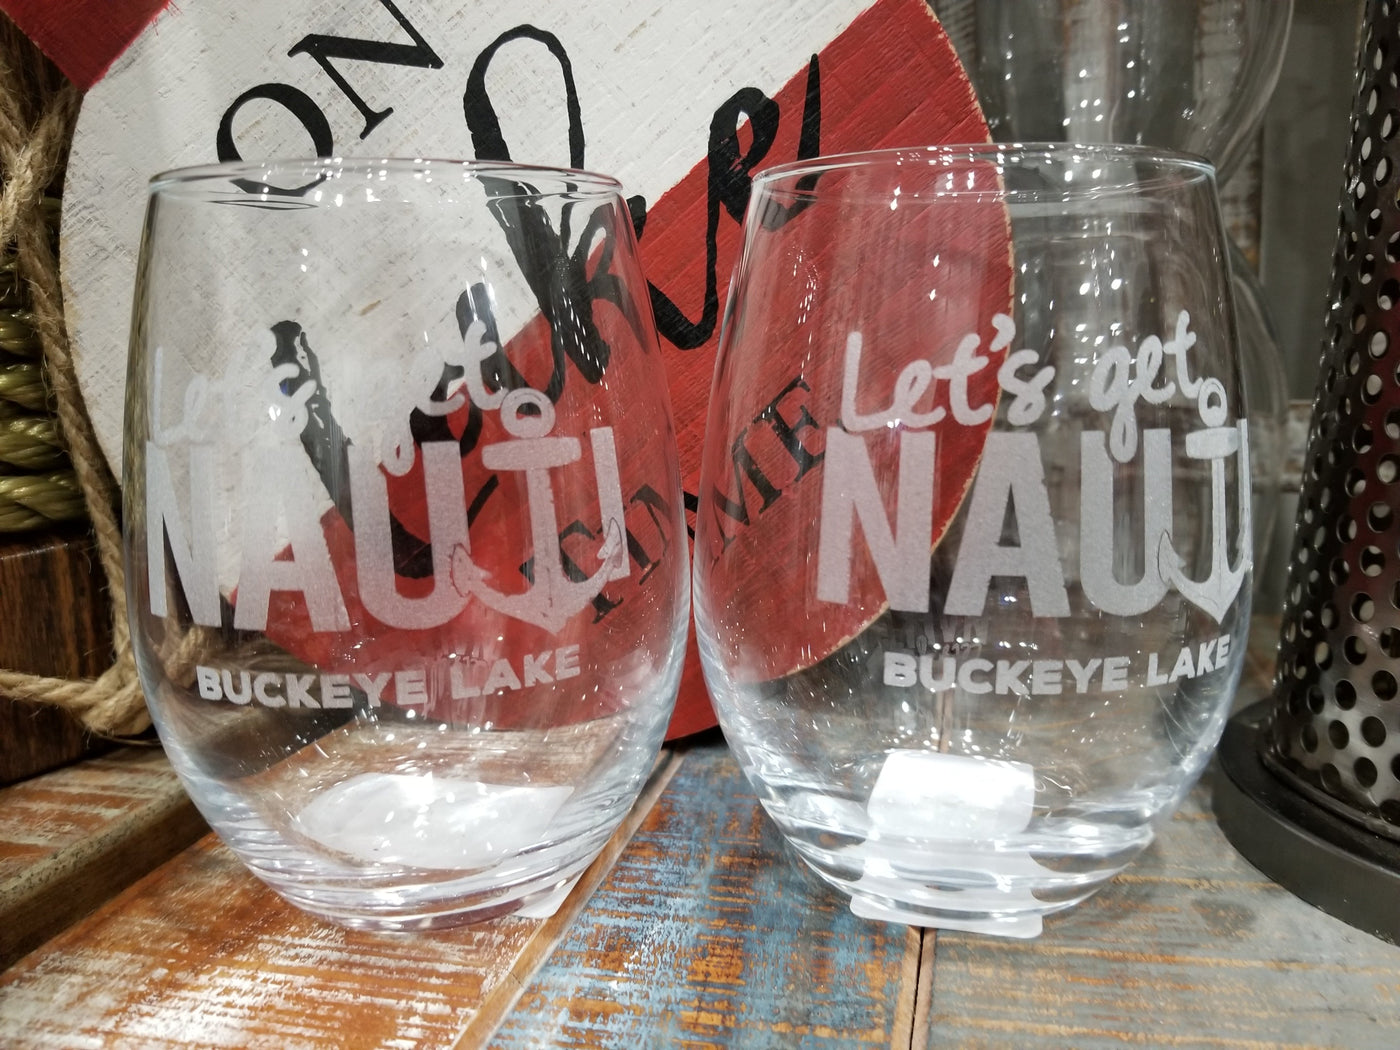 Anchor Etched Stemless Wine Glass Set